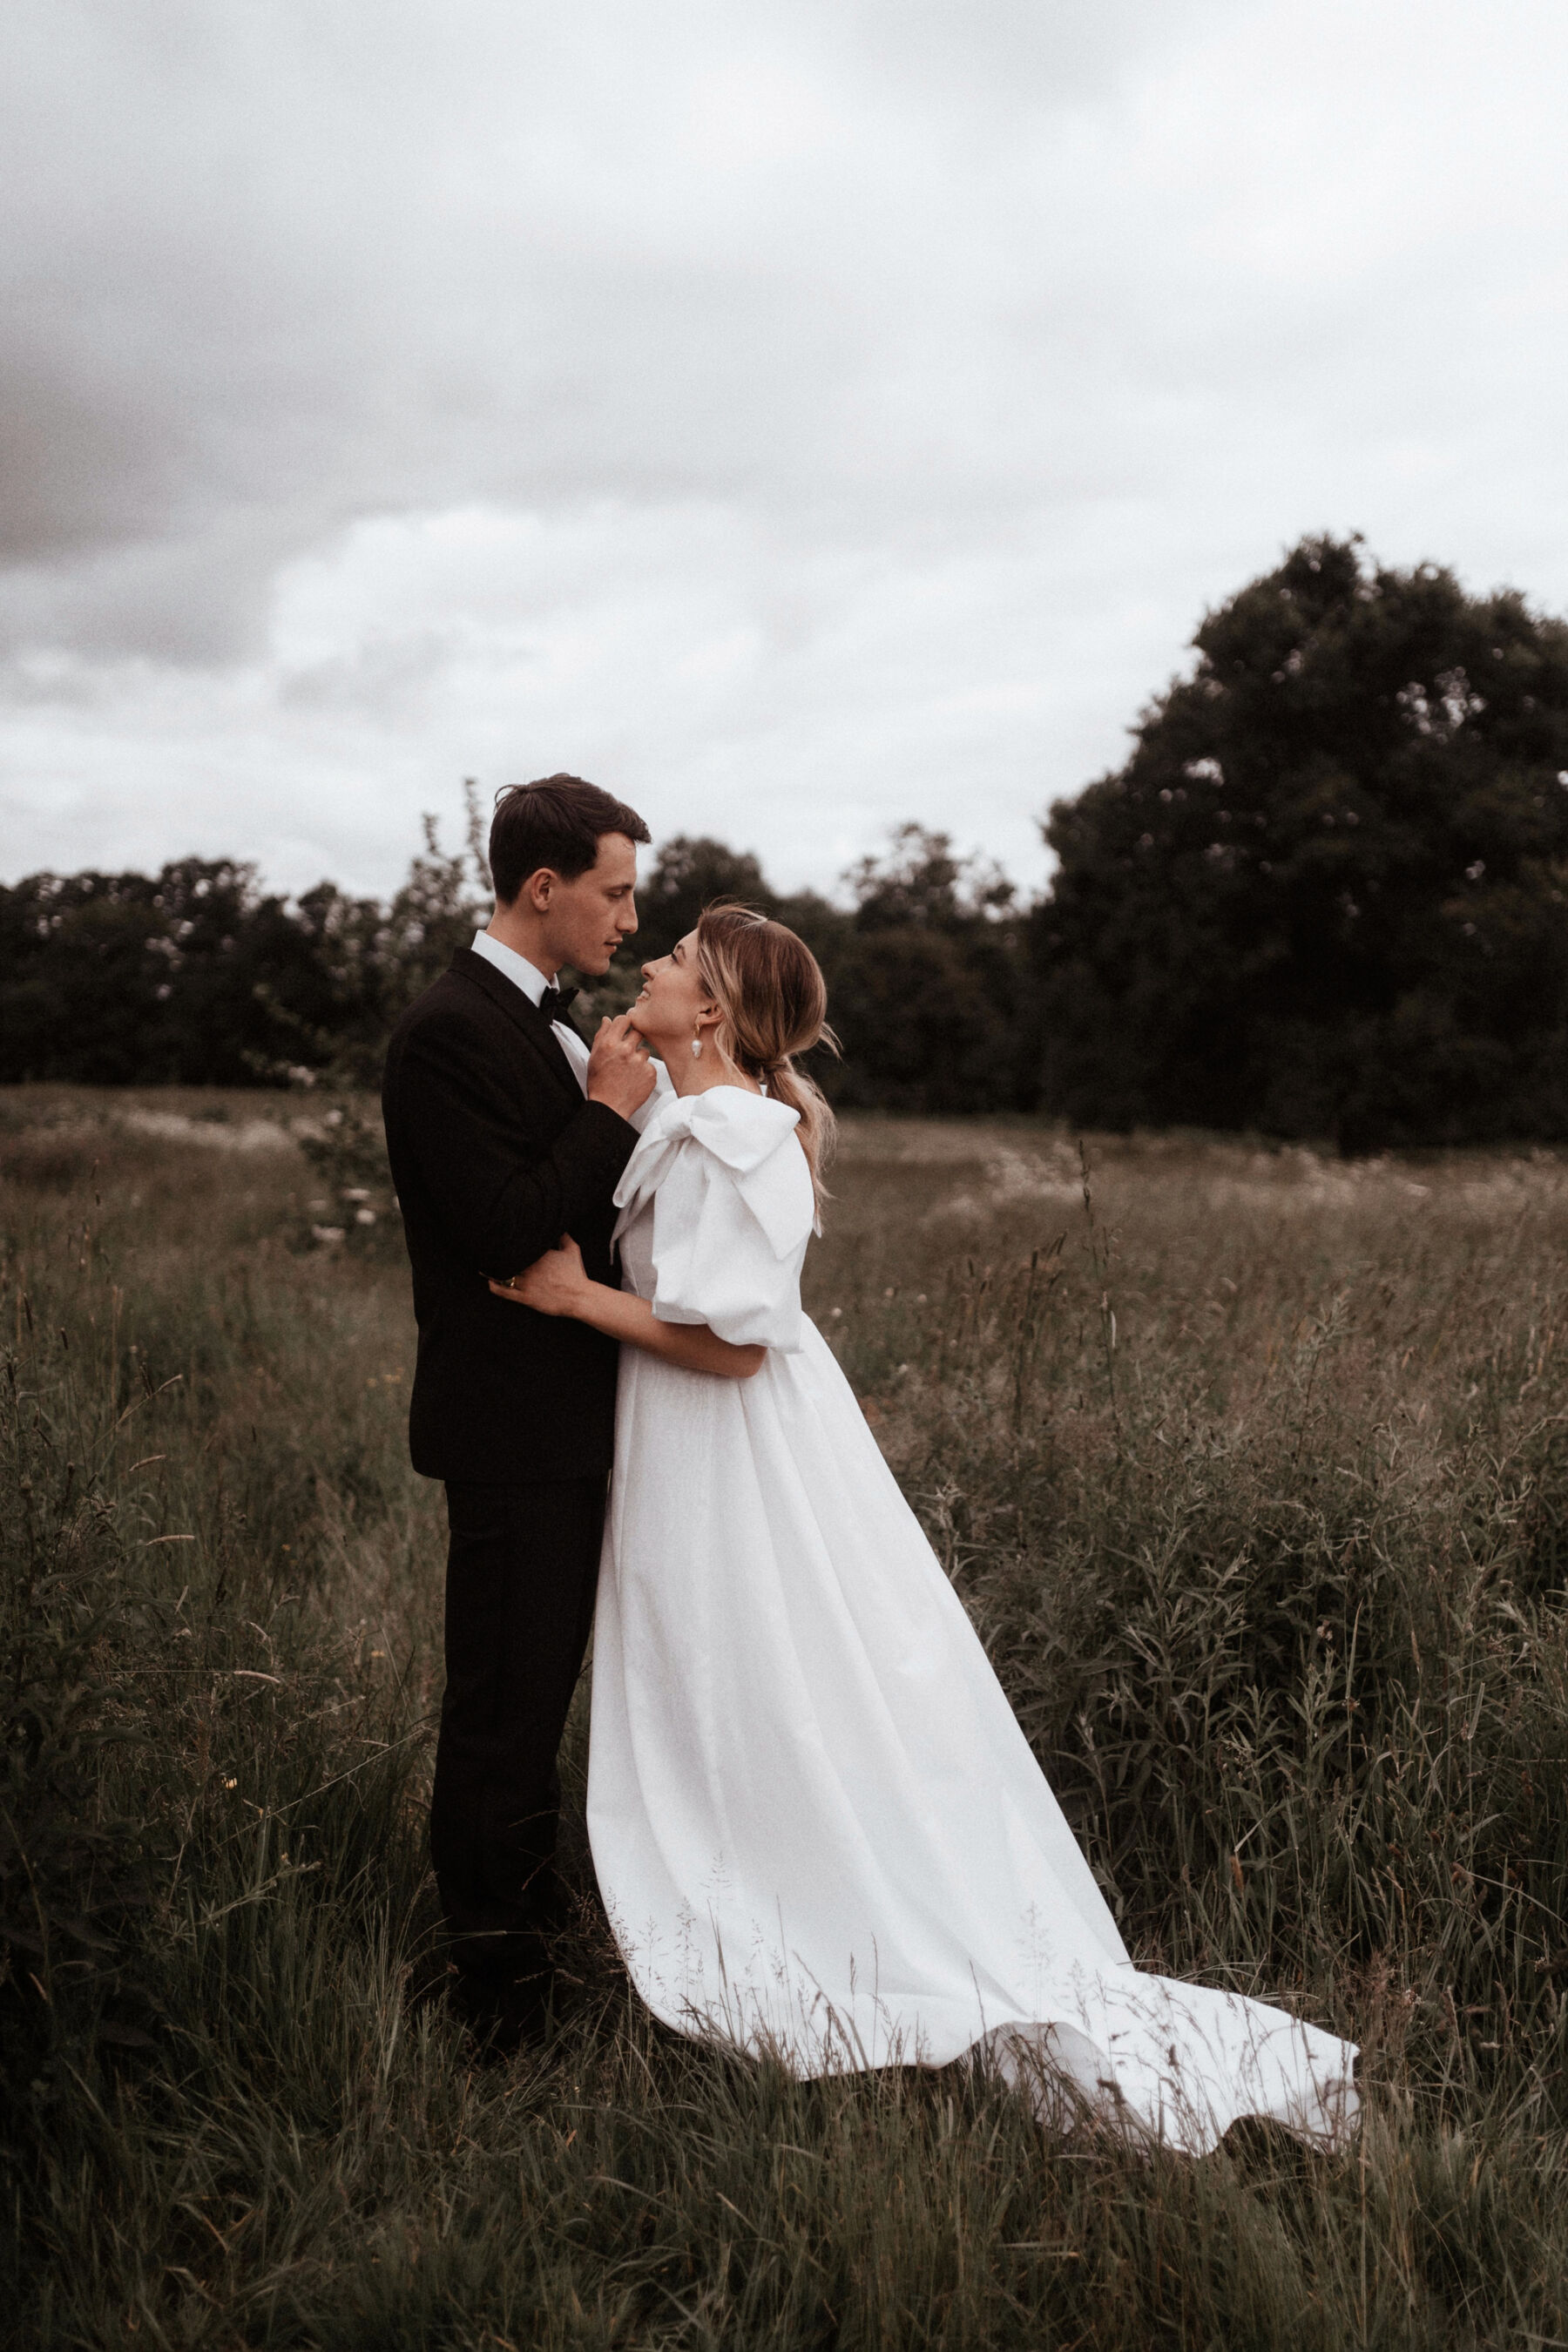 Real bride wearing a Wilden London wedding dress with oversized bows on the shoulders. Image by Rebecca Rees Photography.